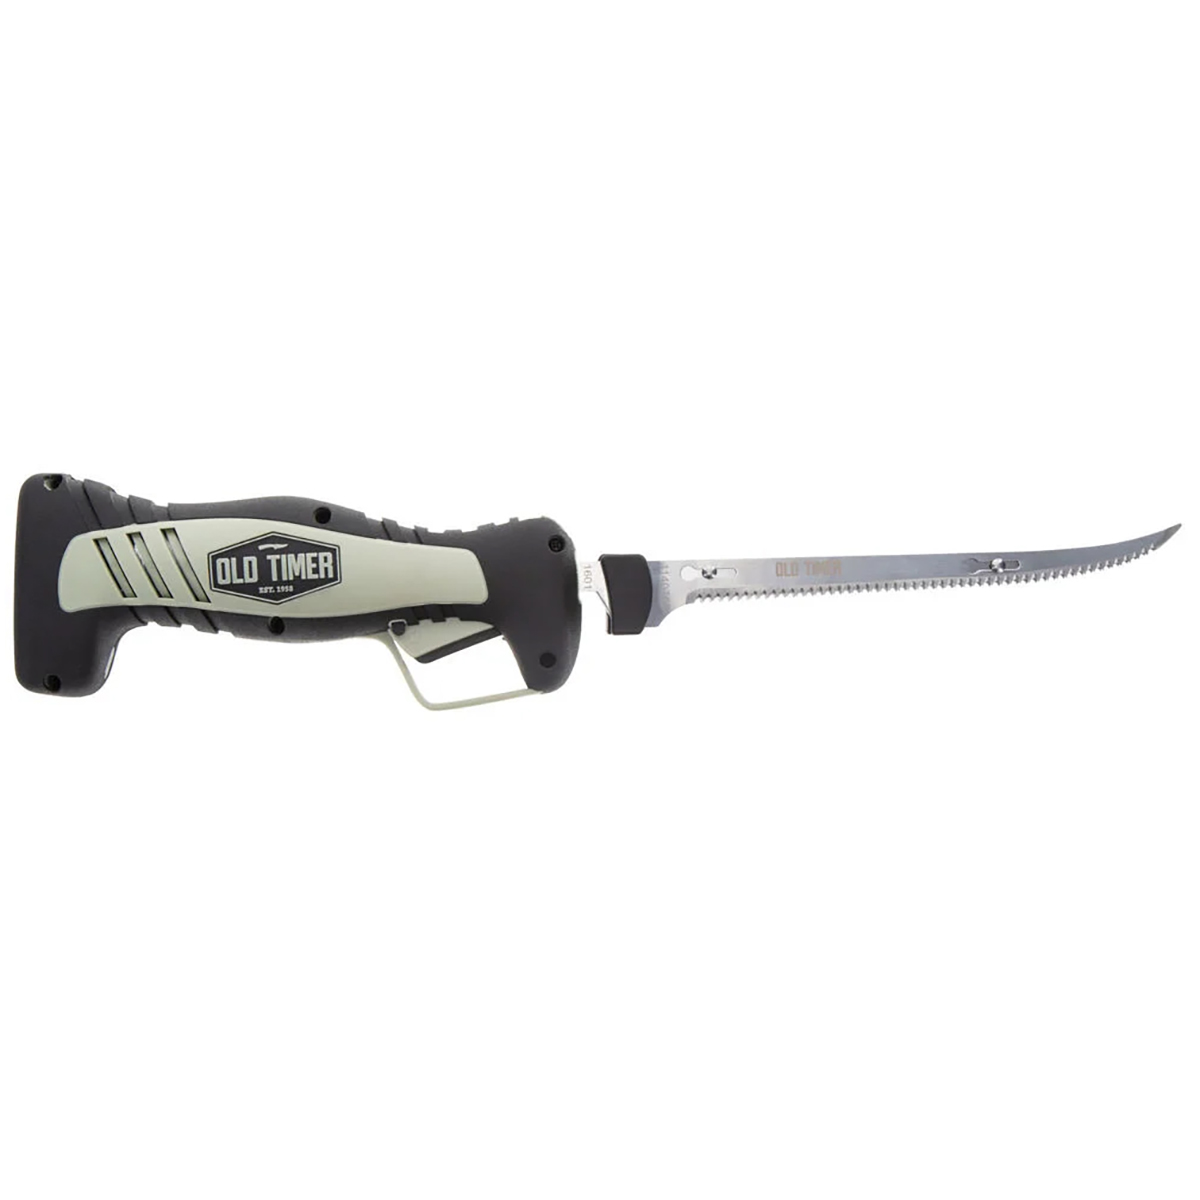 BTI 1140756 Old Timer 8” Blade Electric Fillet Knife - Rechargeable Lithium Ion Battery